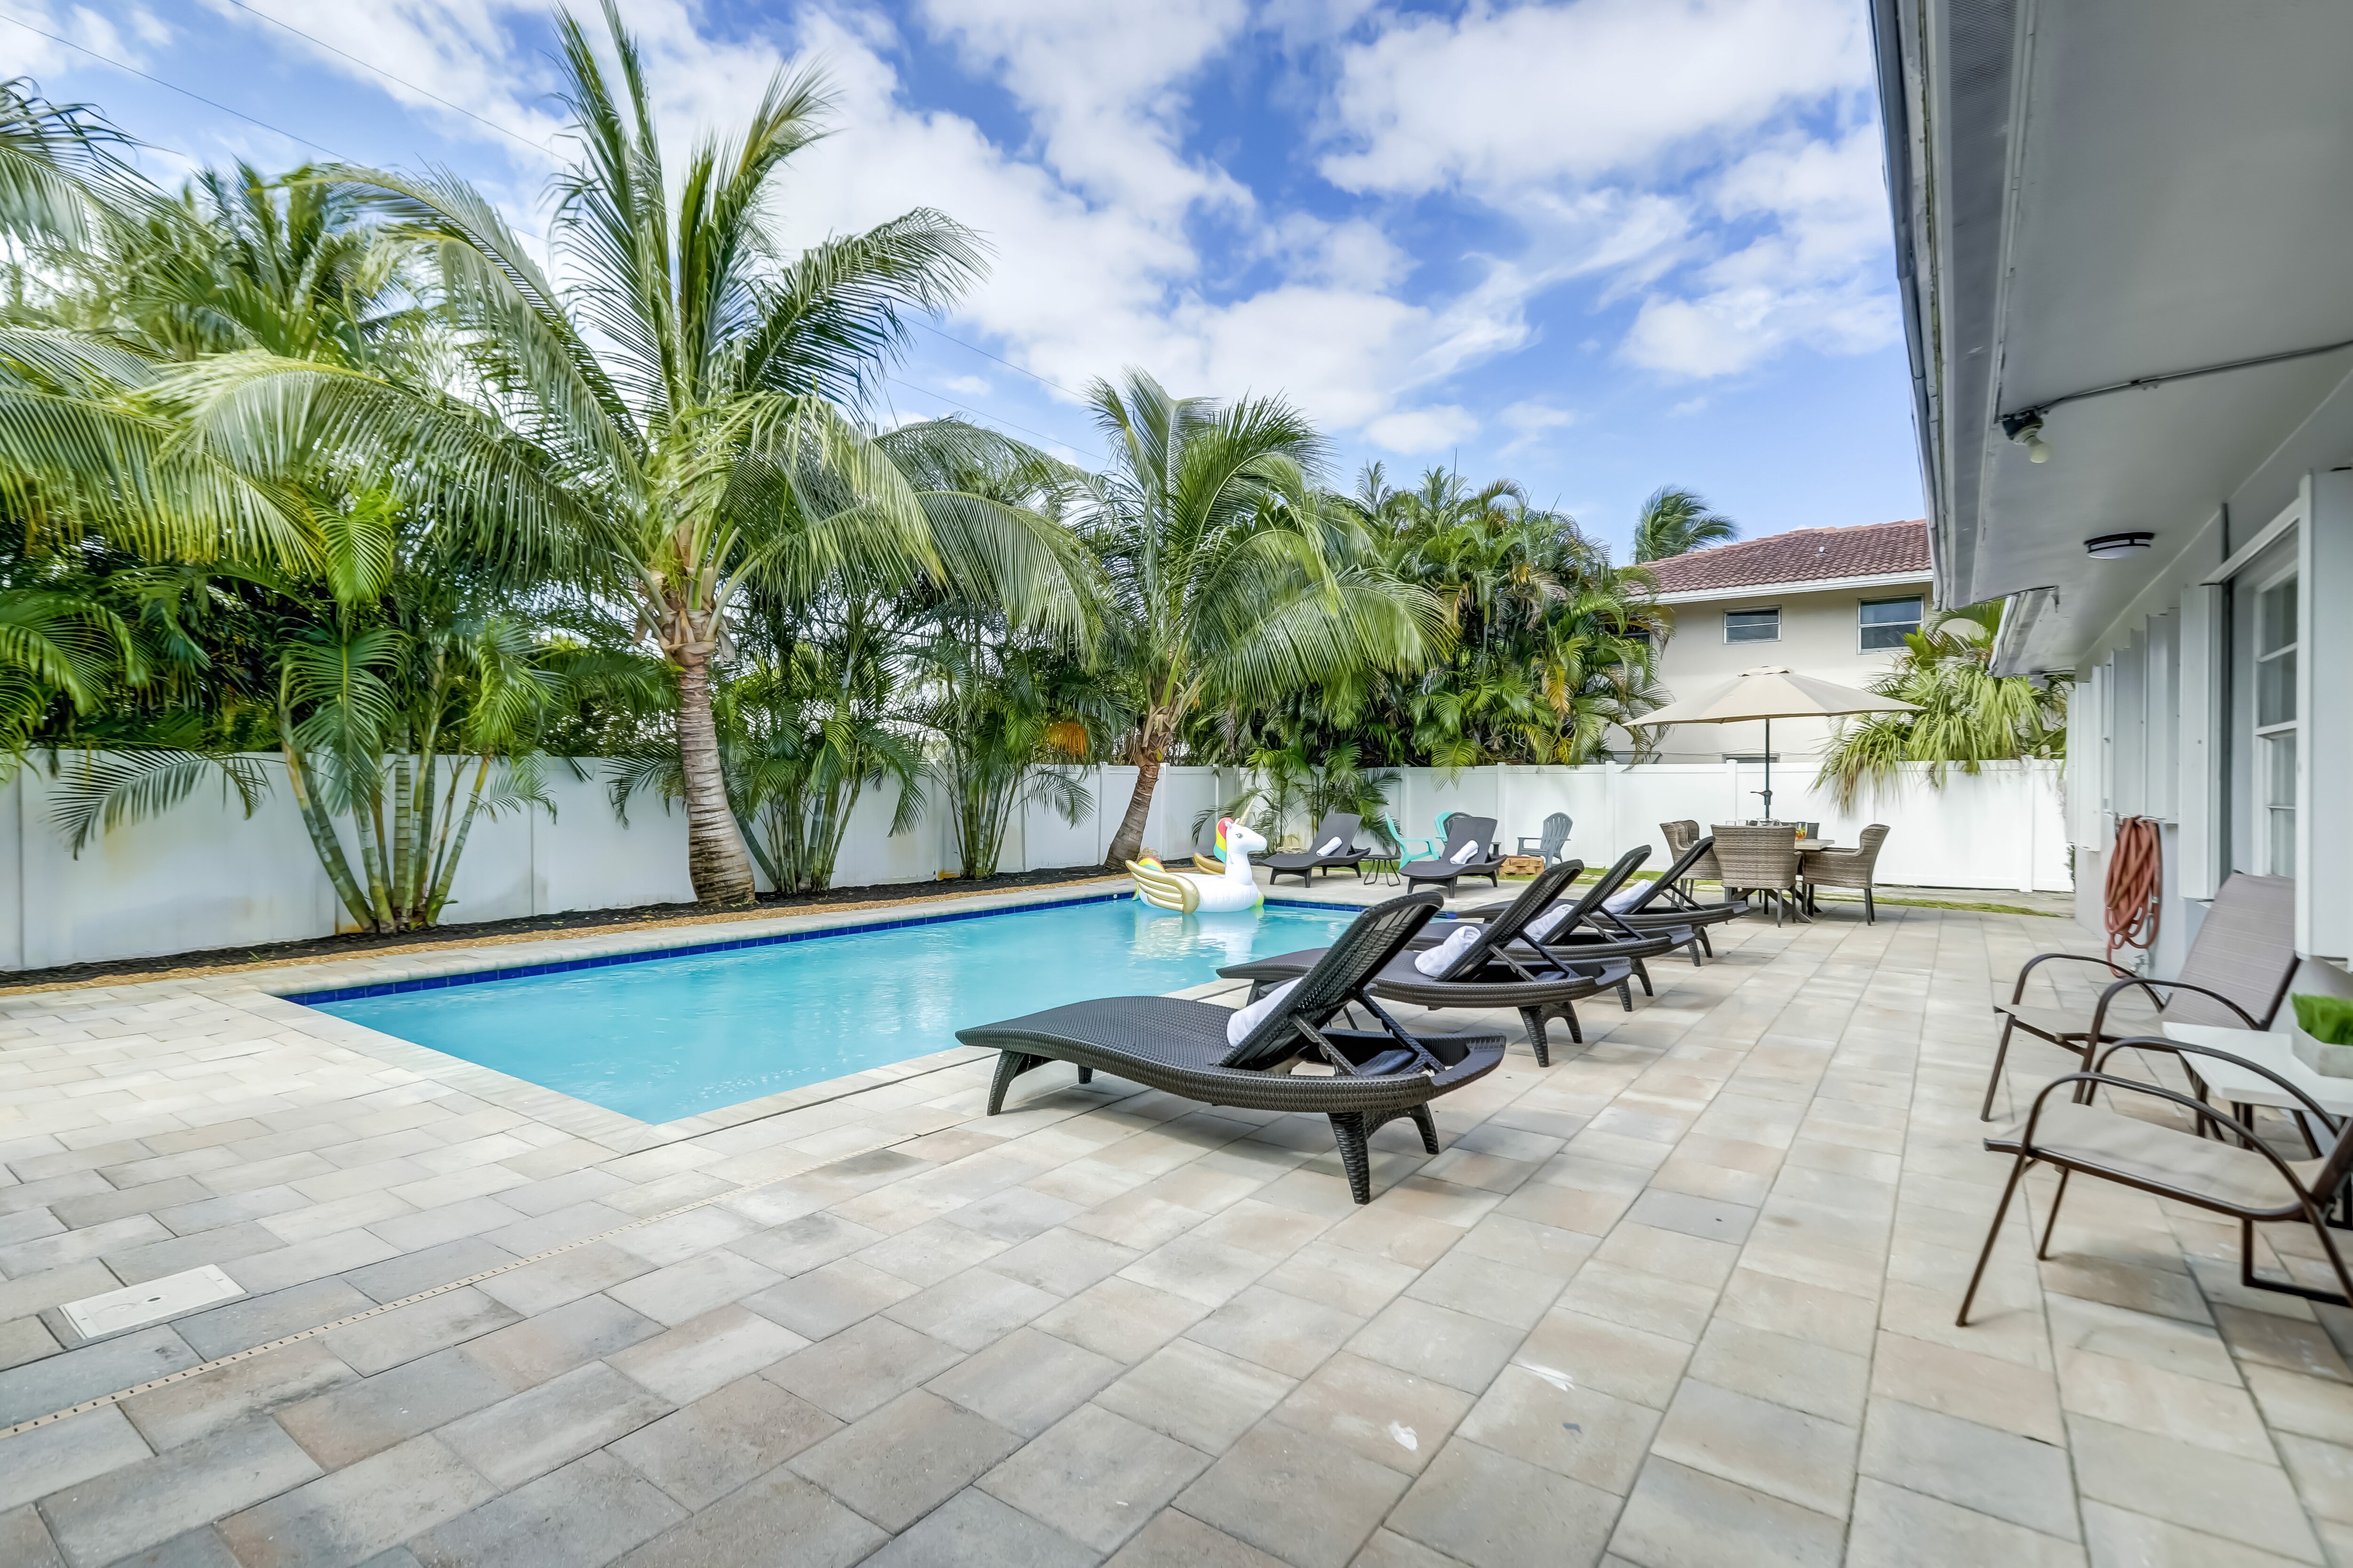 Property Image 1 - Paradise, heated pool: extra$, fire pit